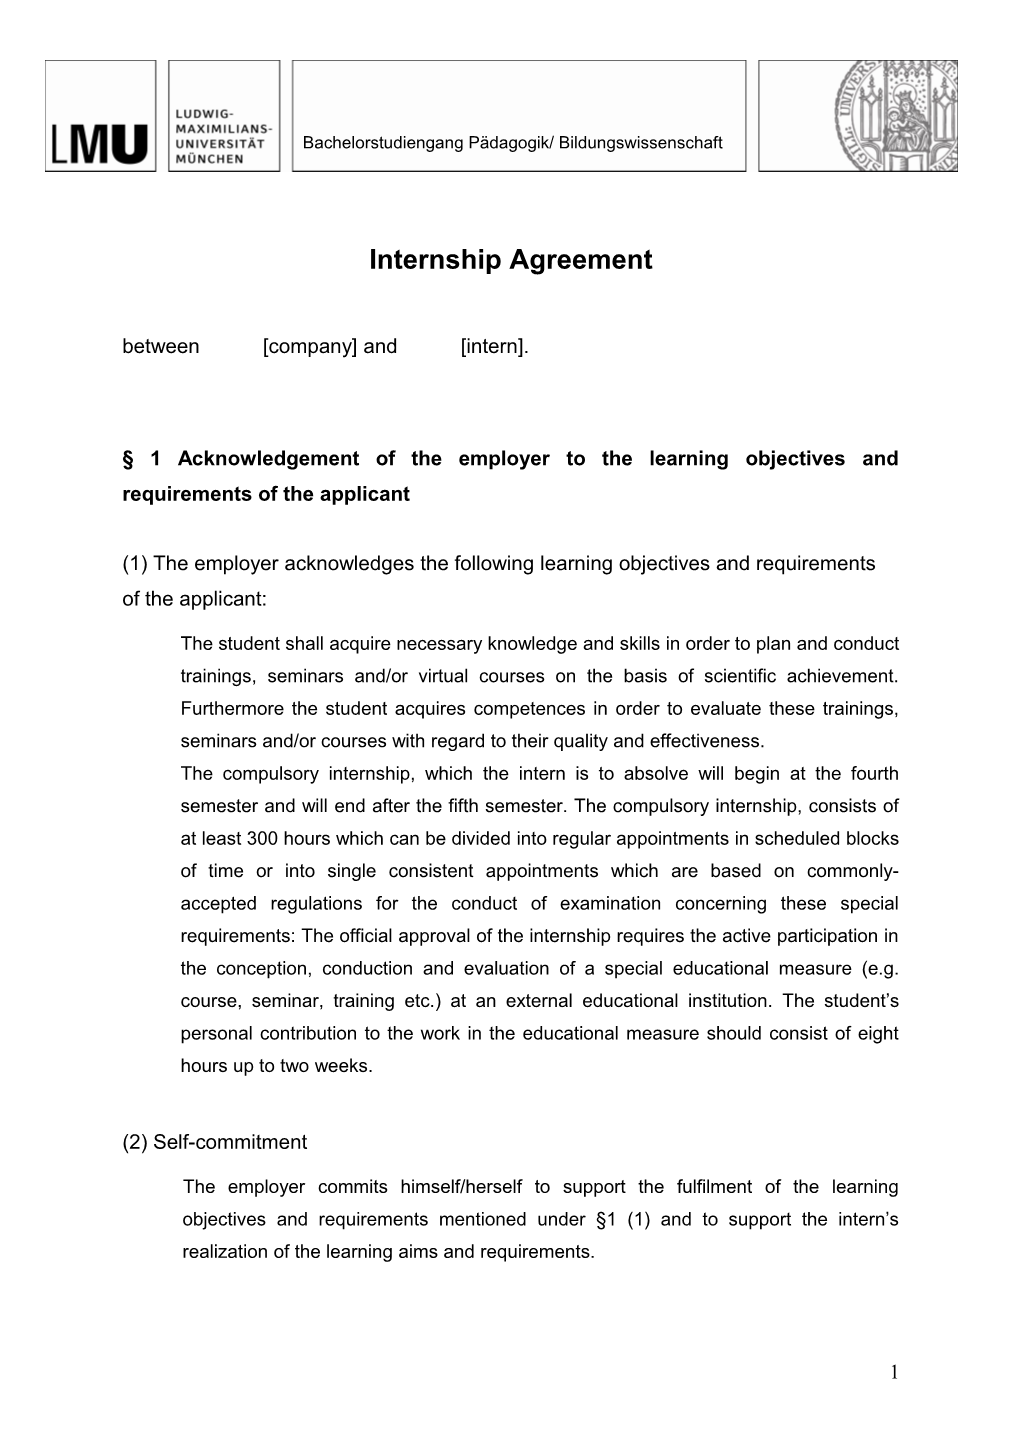 1 Acknowledgement of the Employer to the Learning Objectives and Requirements of the Applicant